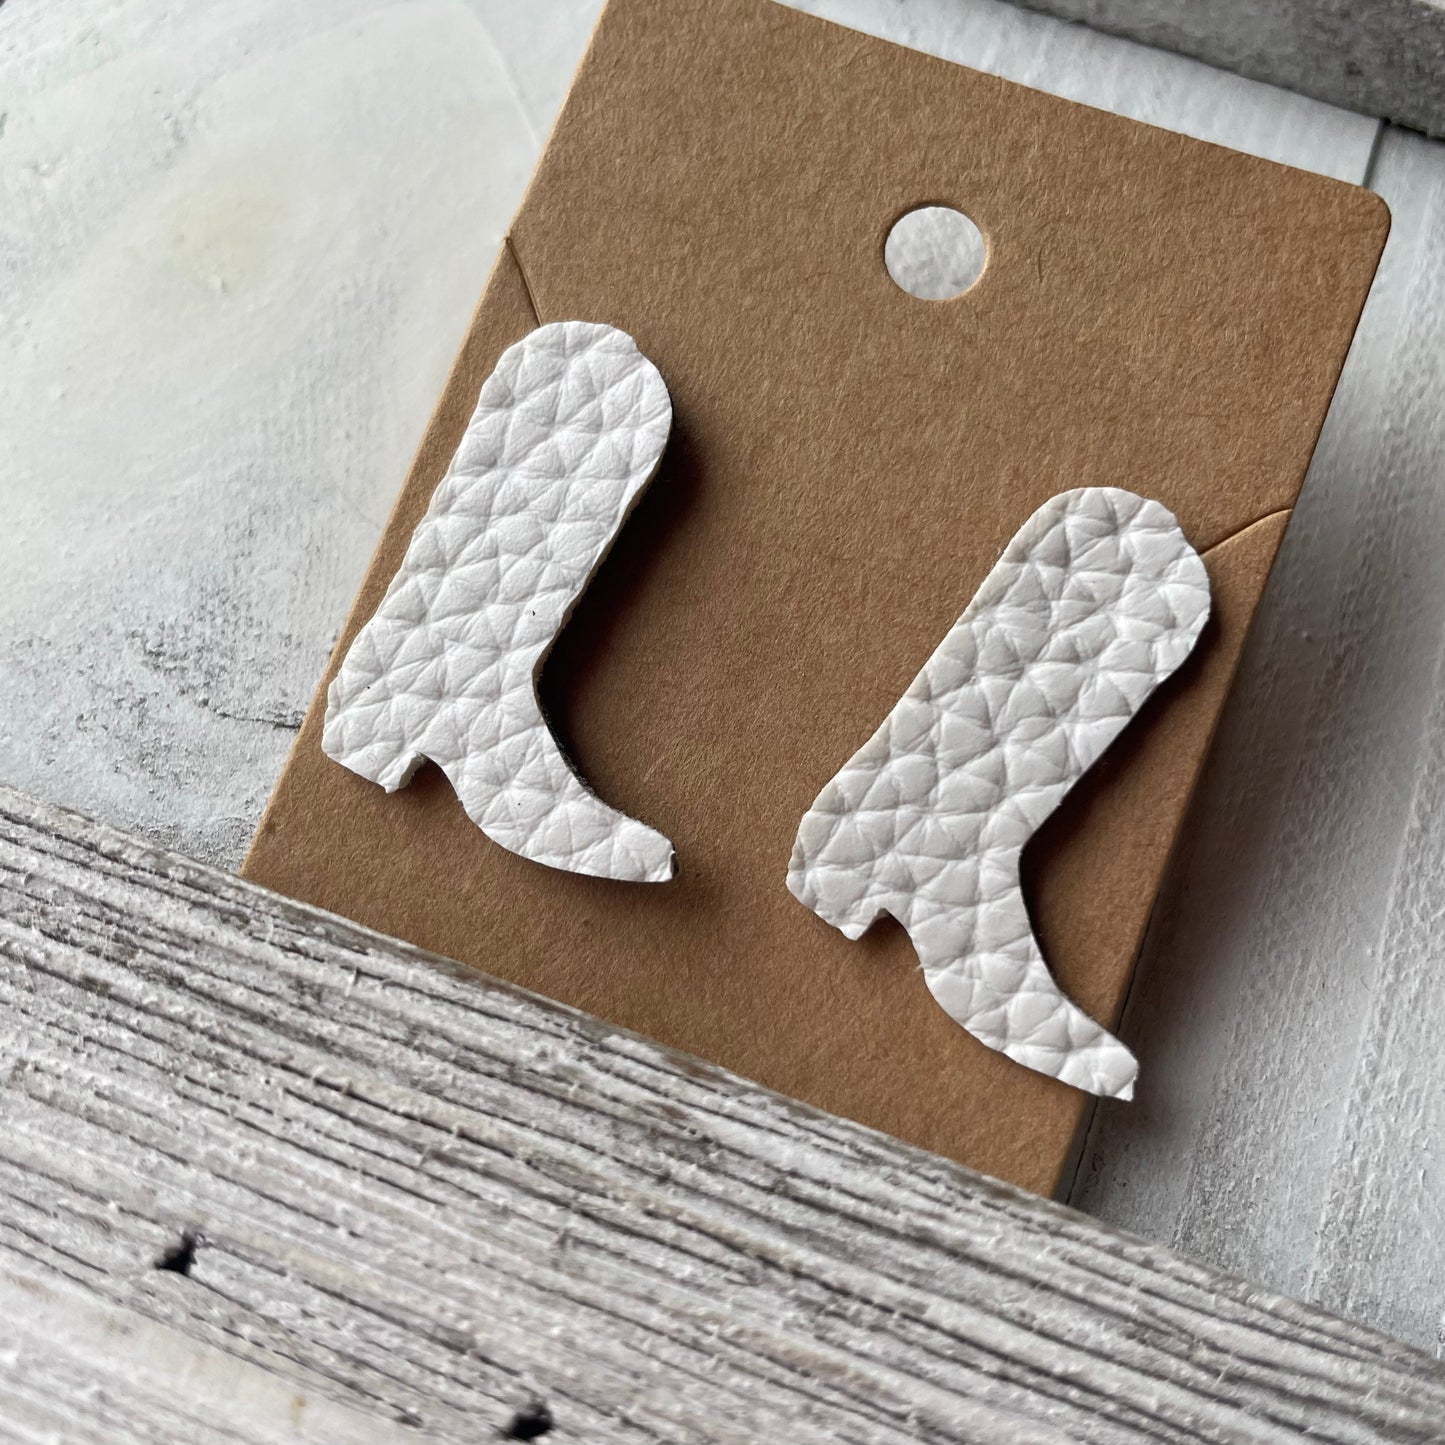 White Cute Cowgirl/cowboy Boots Stud Earrings